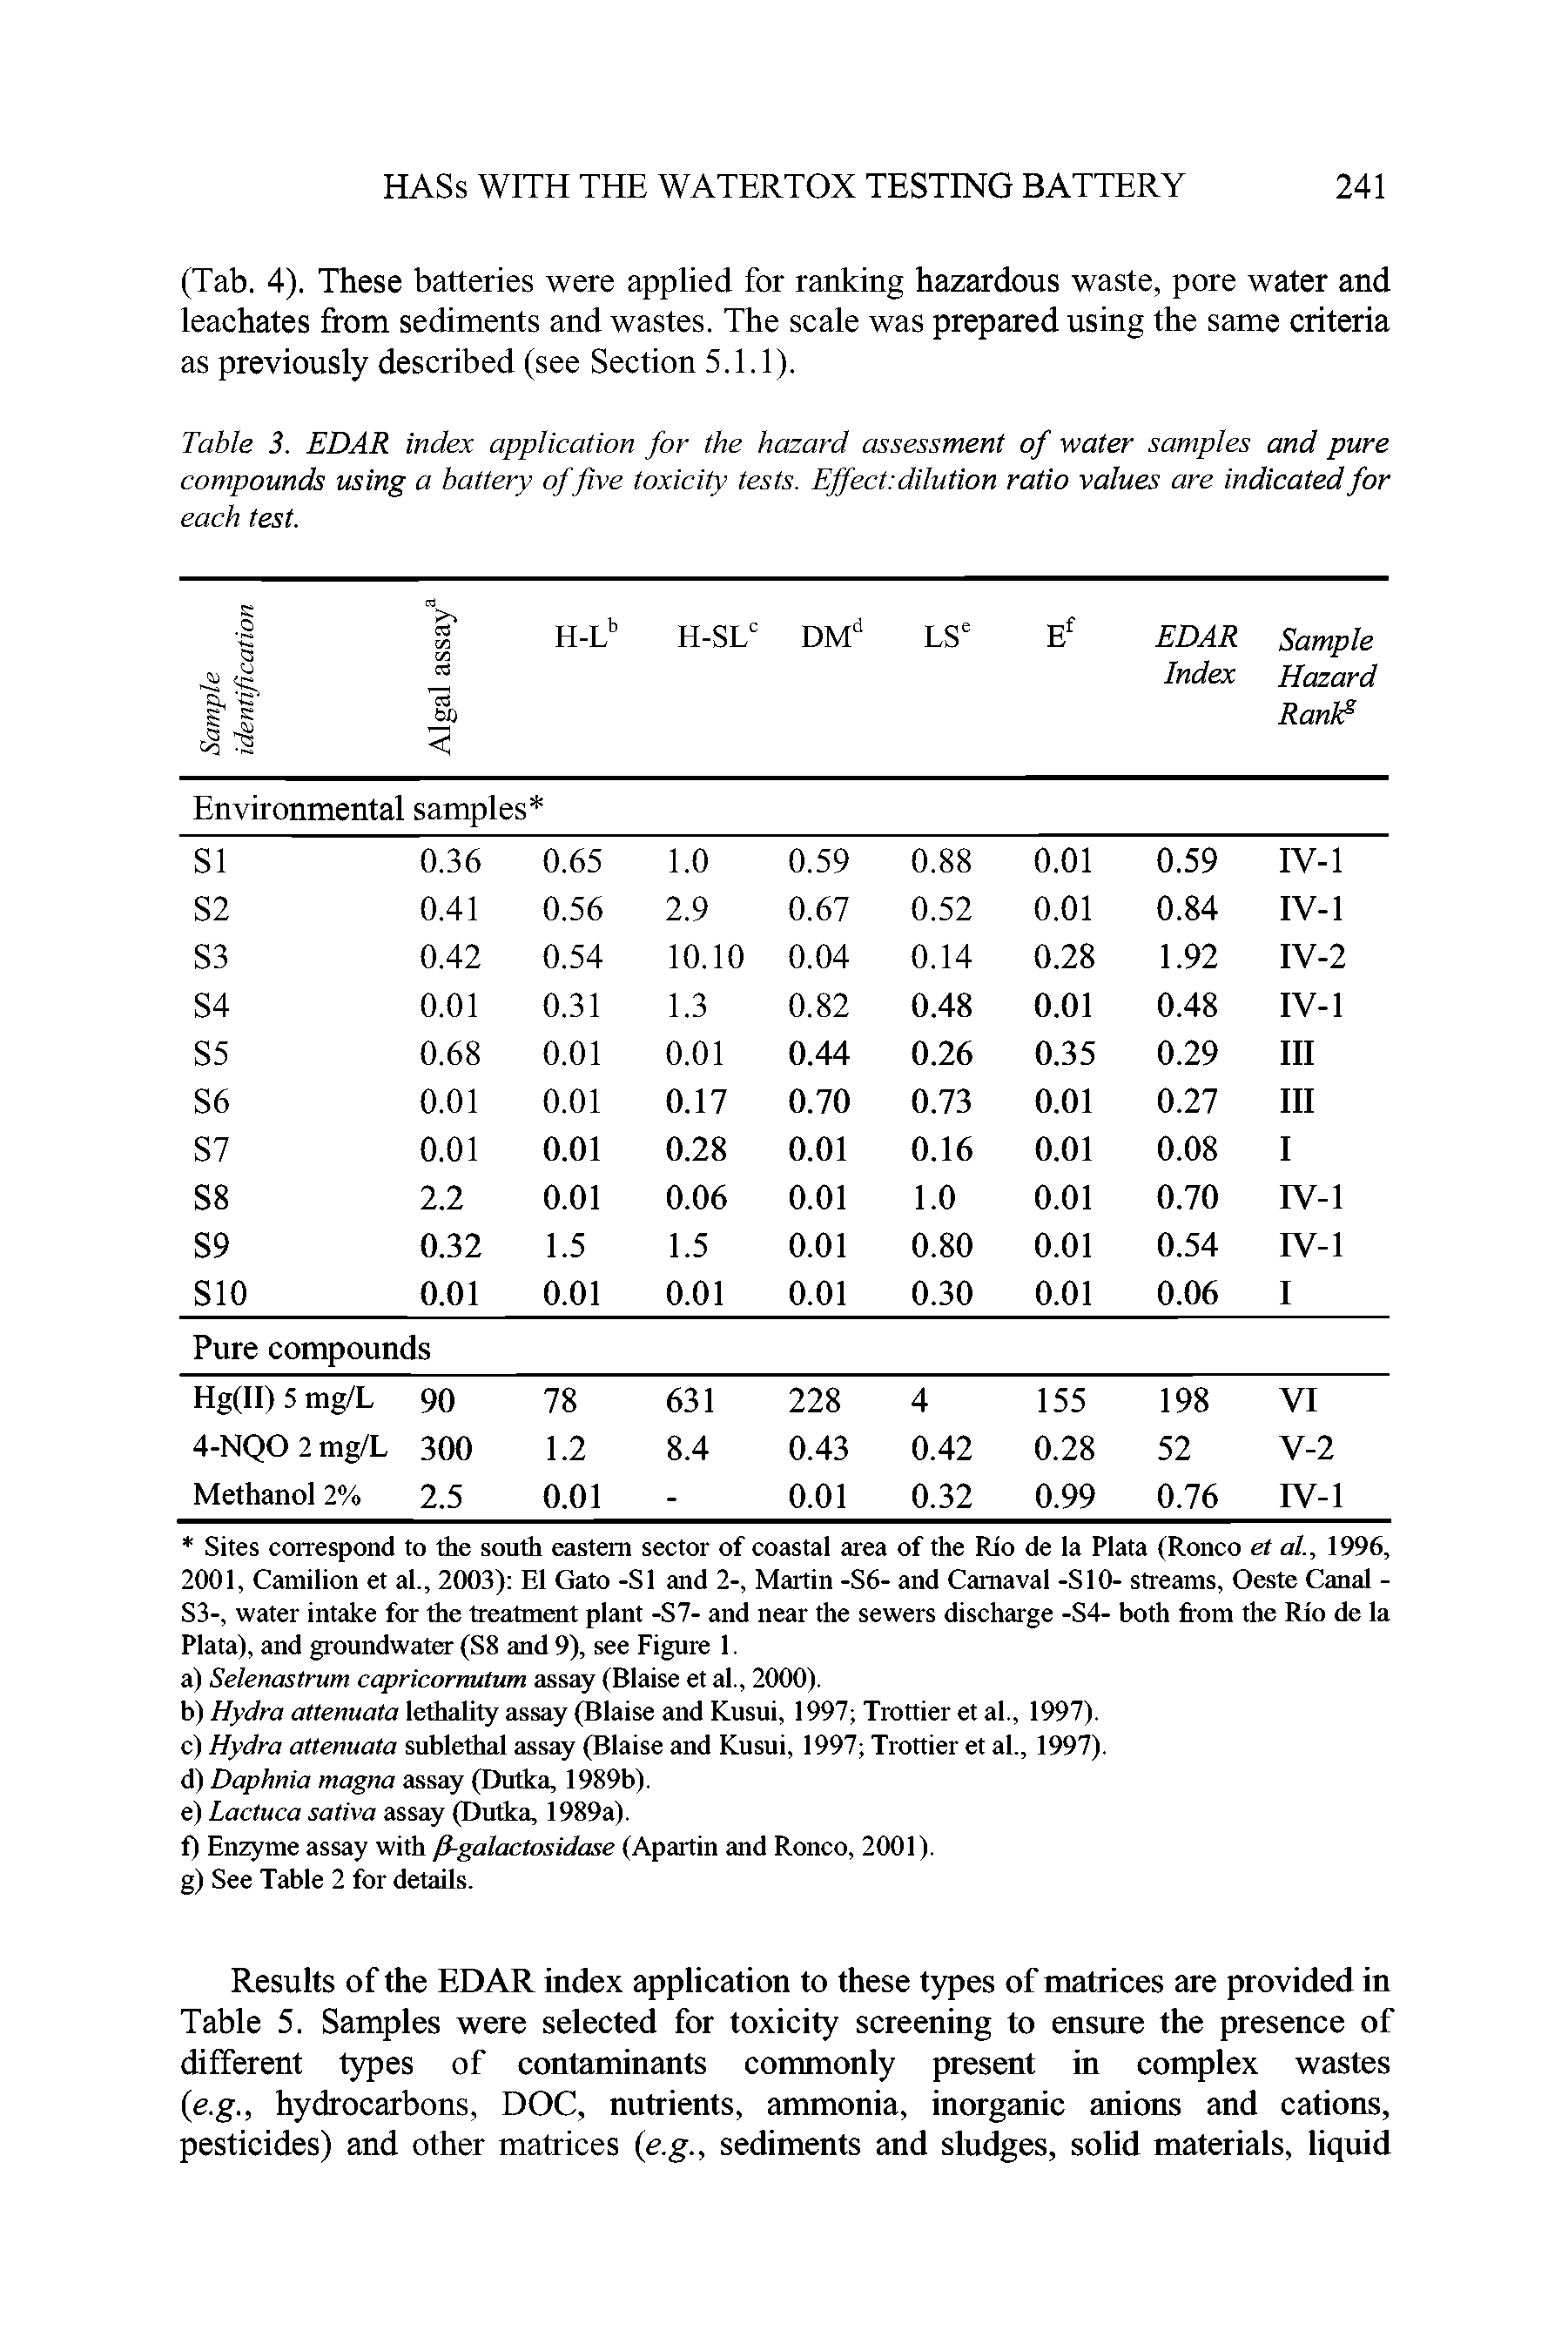 Table 3. EDAR index application for the hazard assessment of water samples and pure compounds using a battery offive toxicity tests. Effect dilution ratio values are indicated for each test.